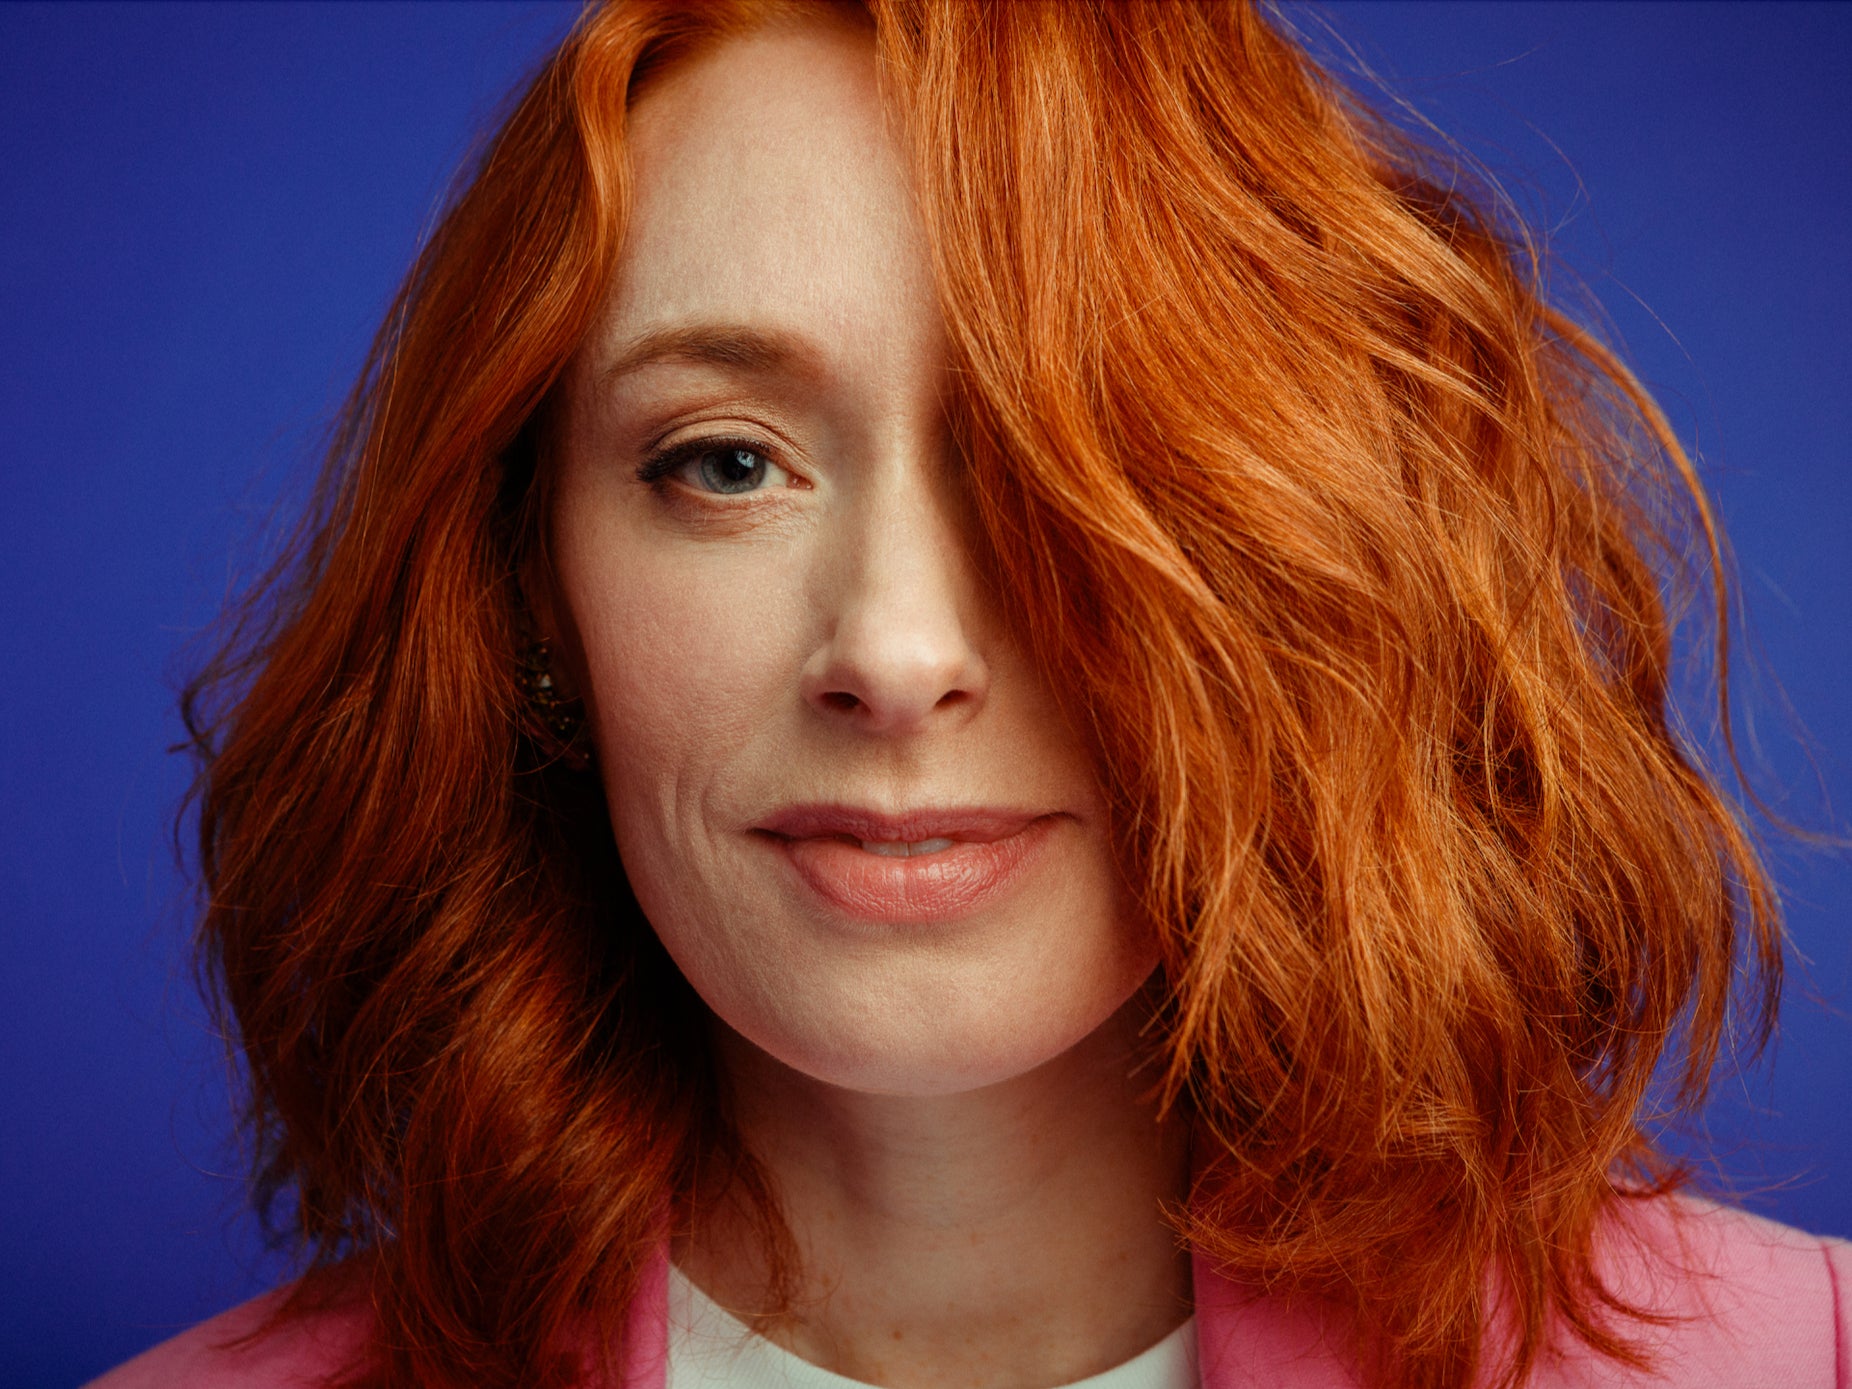 Mathematics of Love author Hannah Fry When you have cancer, youre just like, “Get it out of me, Im terrified” The Independent